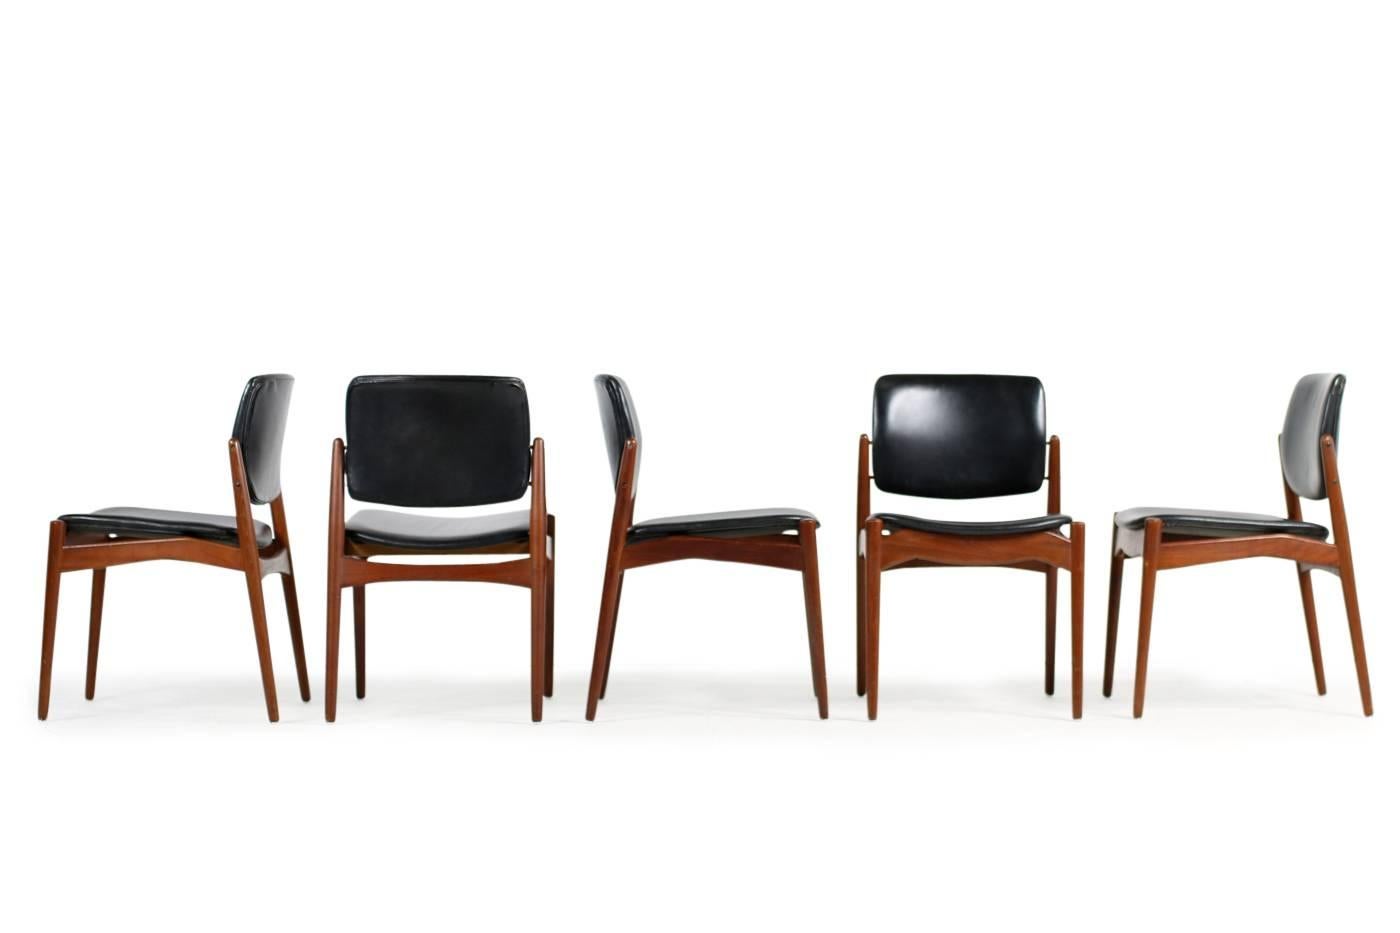 Beautiful set of five chairs, solid teak, authentic real leather, beautiful vintage condition. Design by Erik Buck model 66 for Ørum Møbler, Denmark.